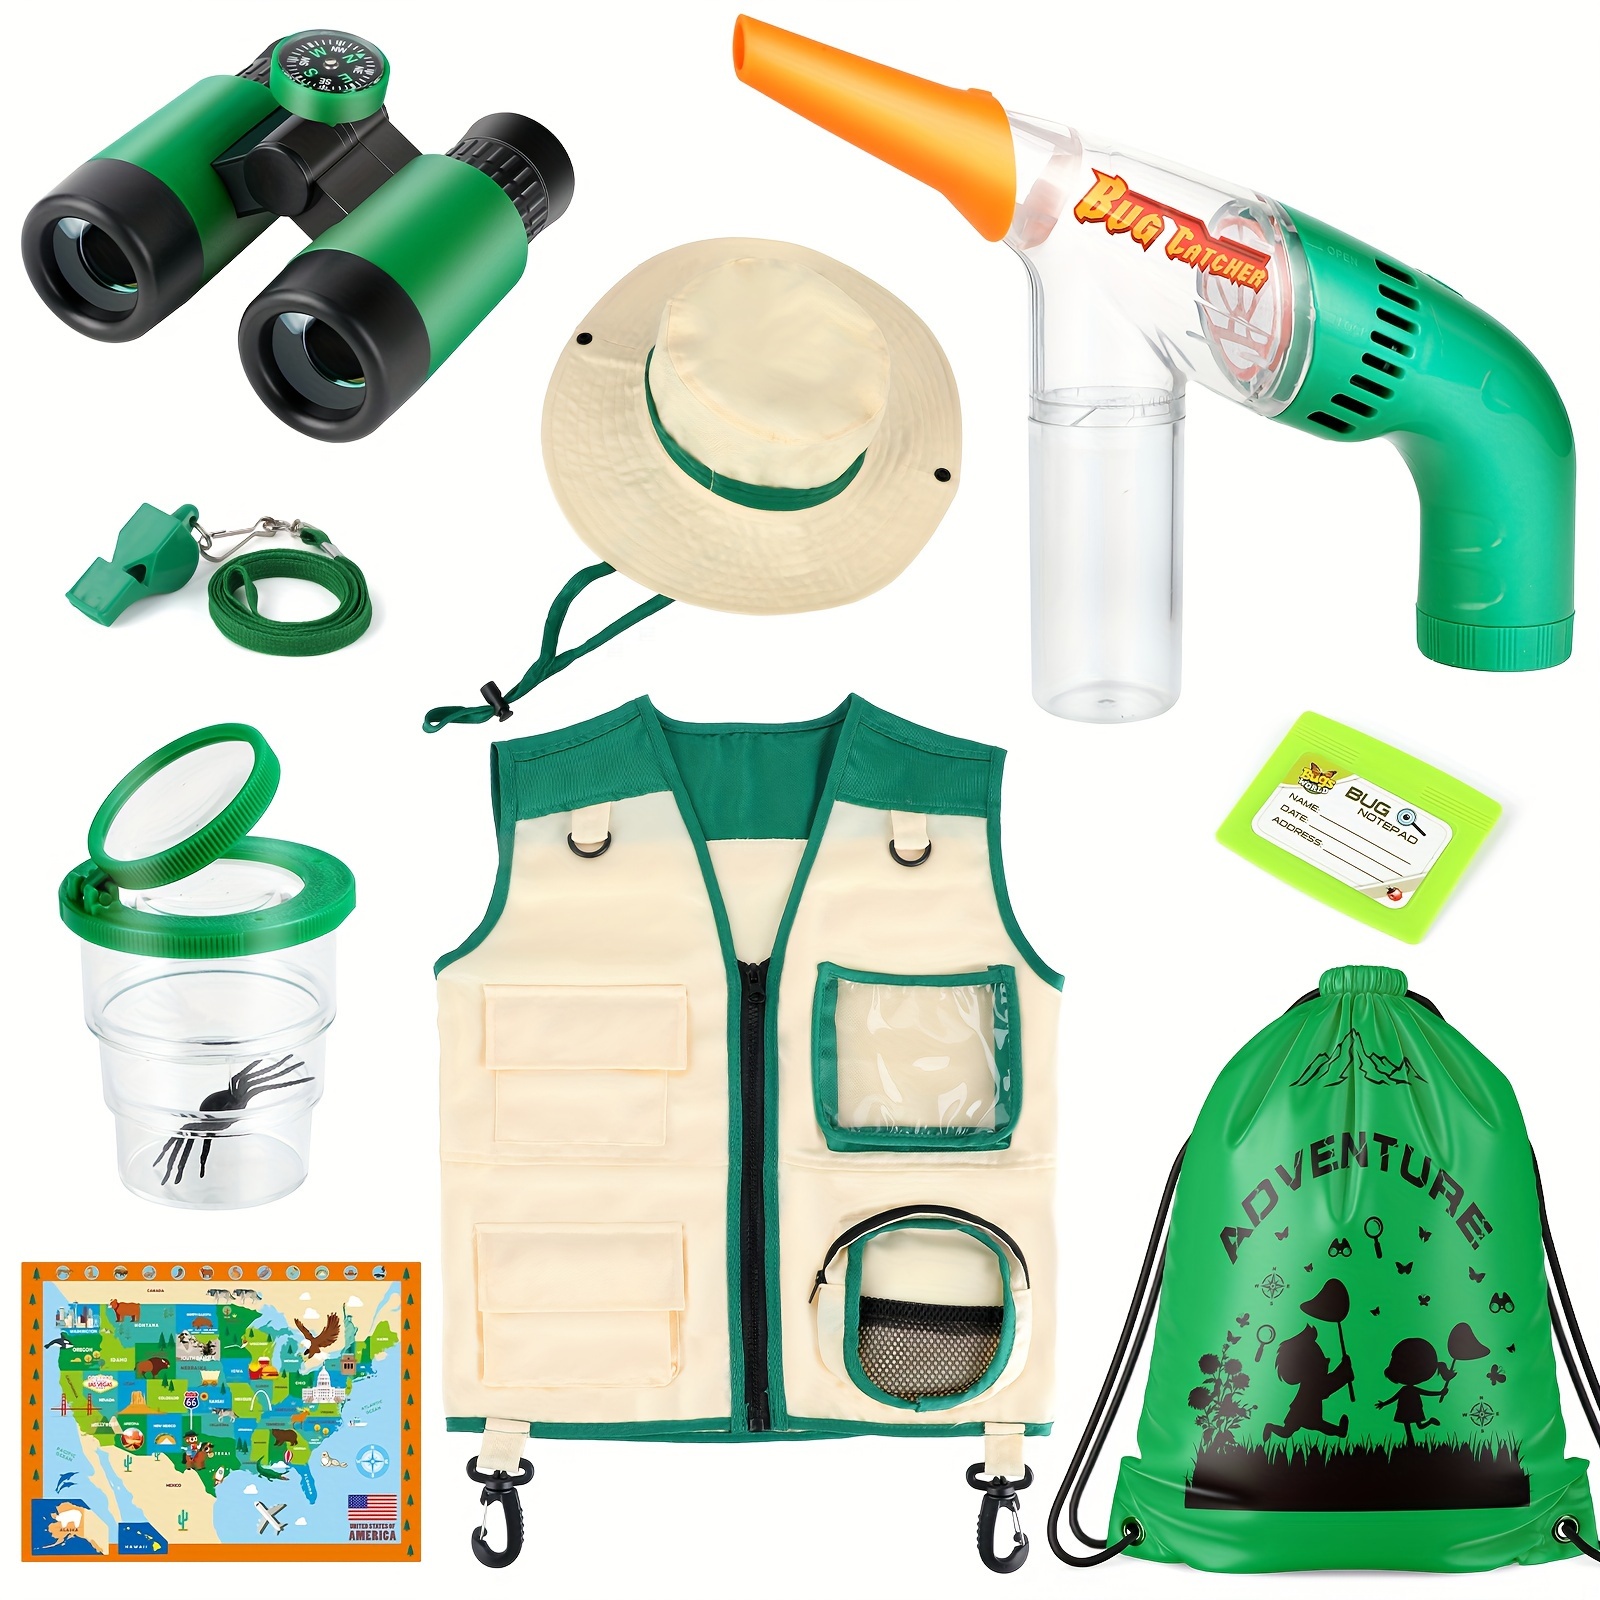 

Kids Explorer Kit & Bug Catcher Kit For Kids, Explorer Kit With Bug Catcher Vacuum, Kids Safari Vest & Hat, Kids Camping Toys With Binoculars, Outside Outdoor Toys For Kids Ages 3-8